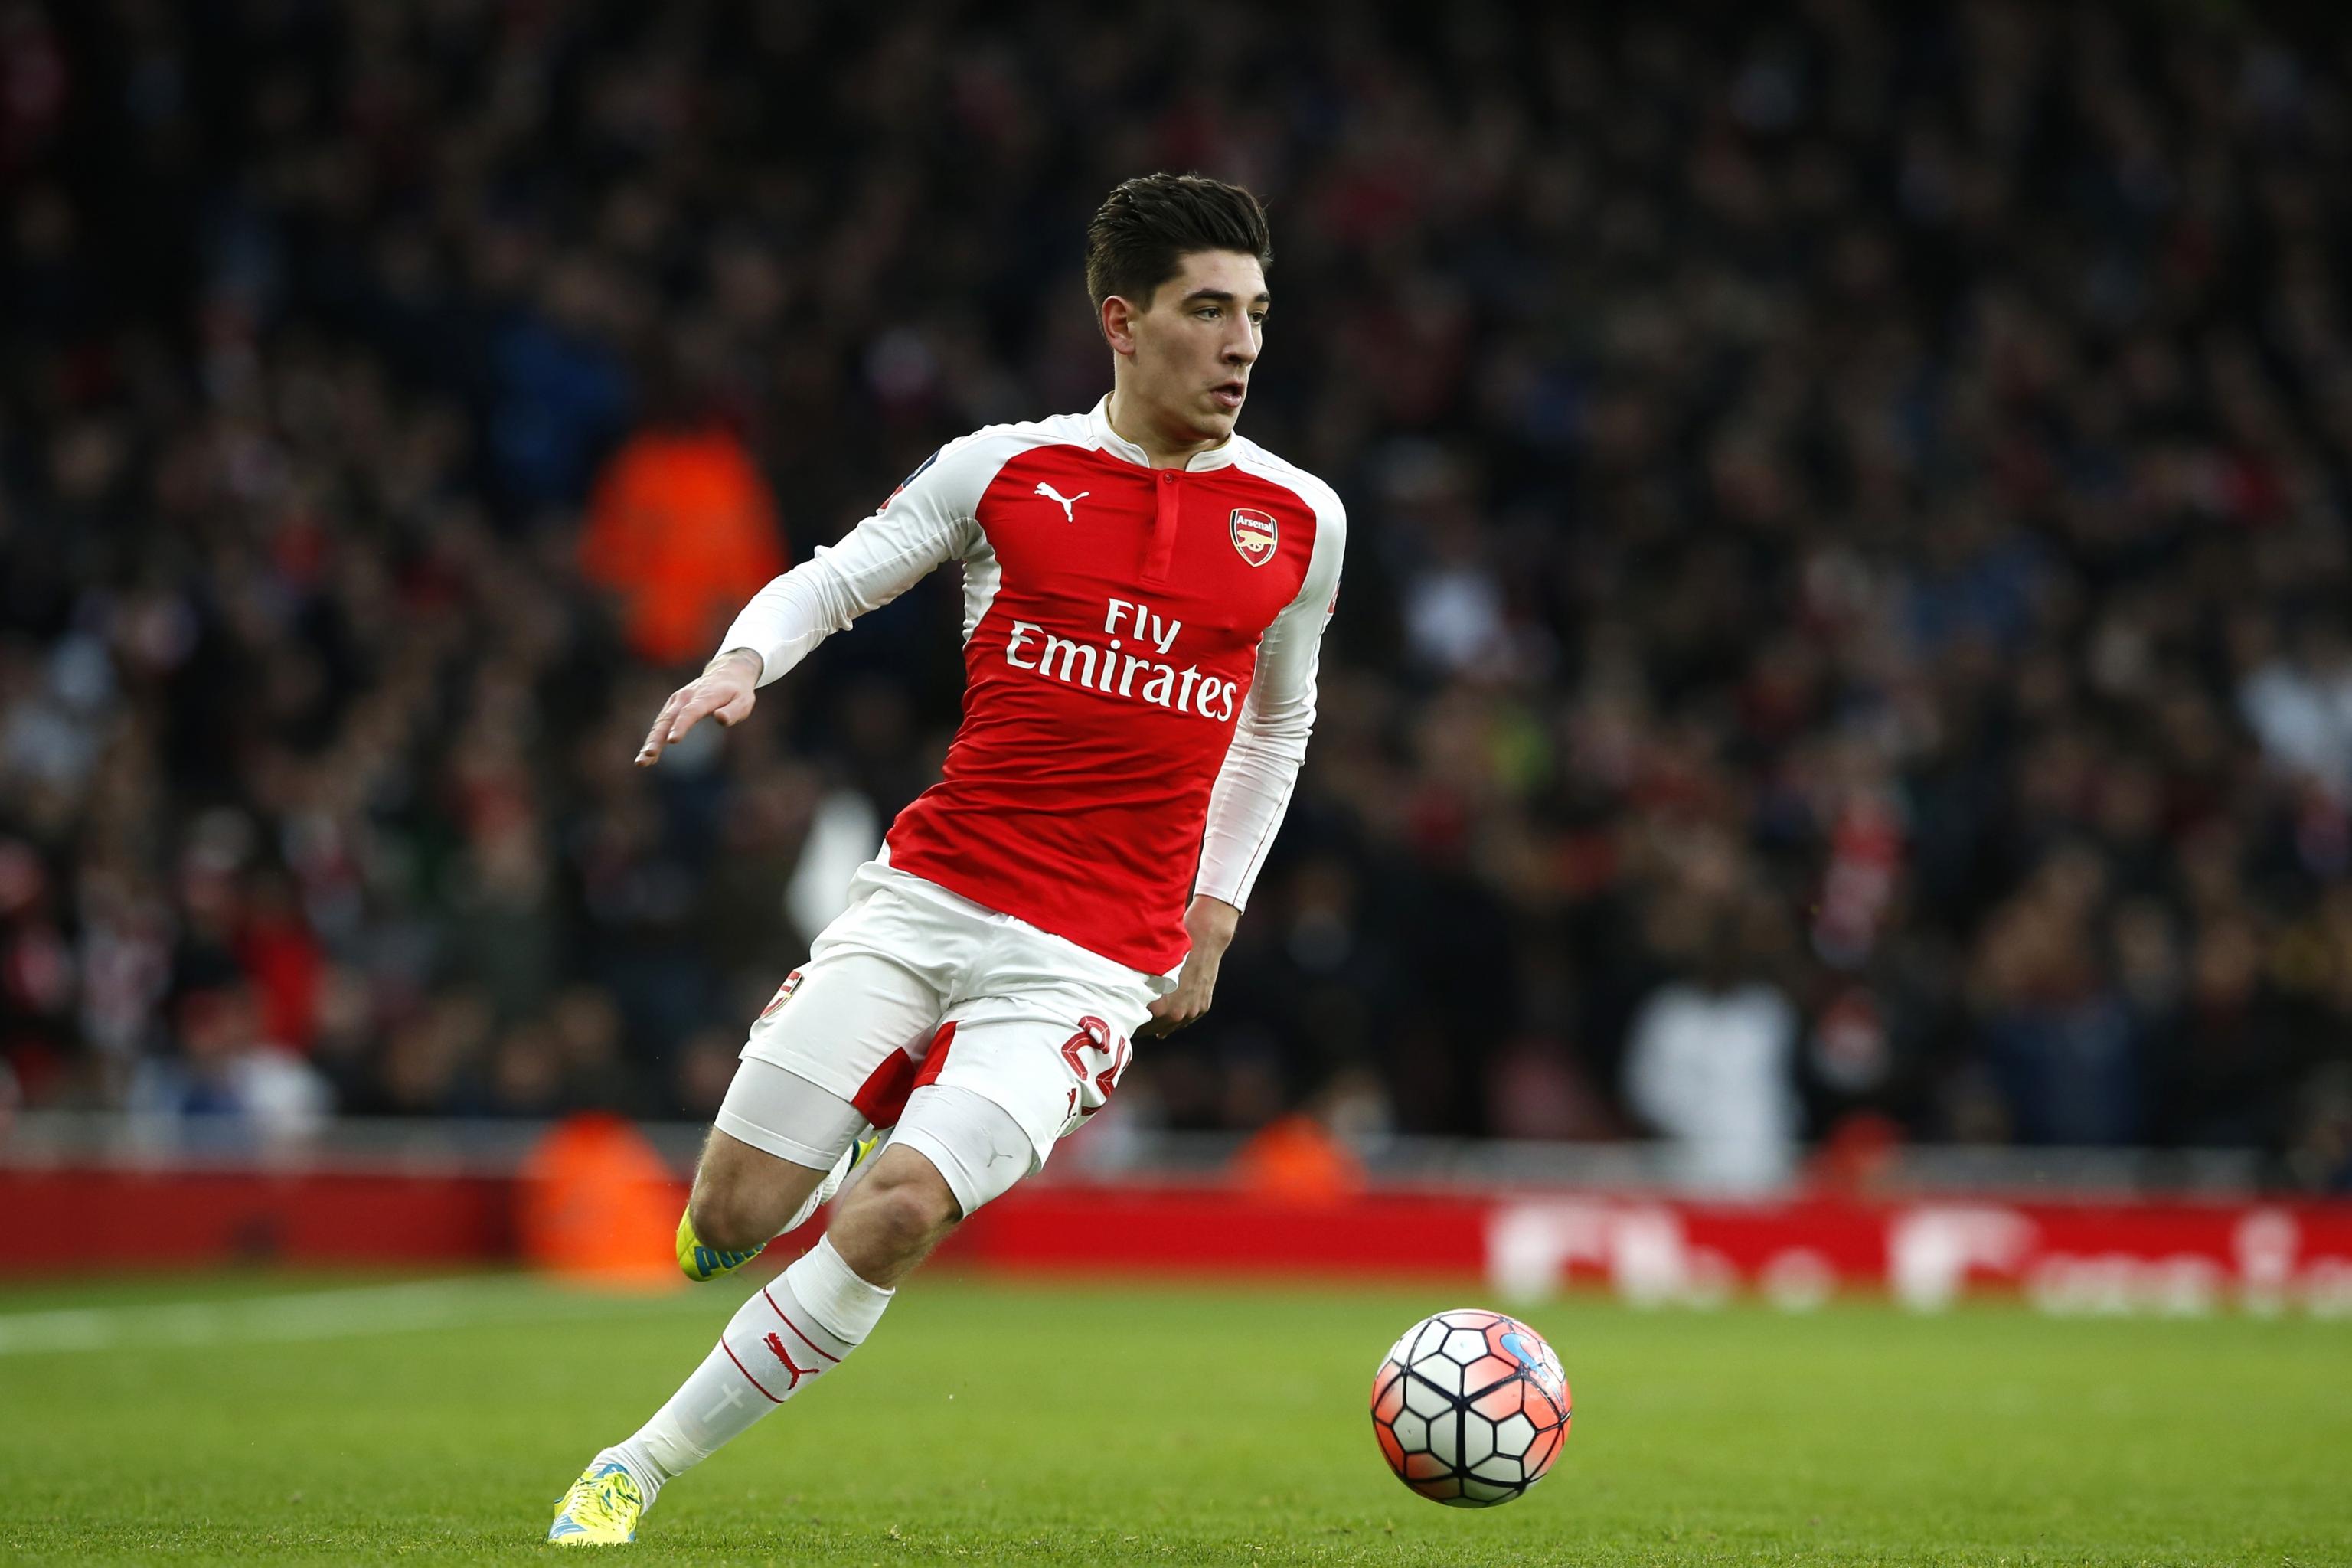 Bacary Sagna suggests Hector Bellerin will leave Arsenal - 'He